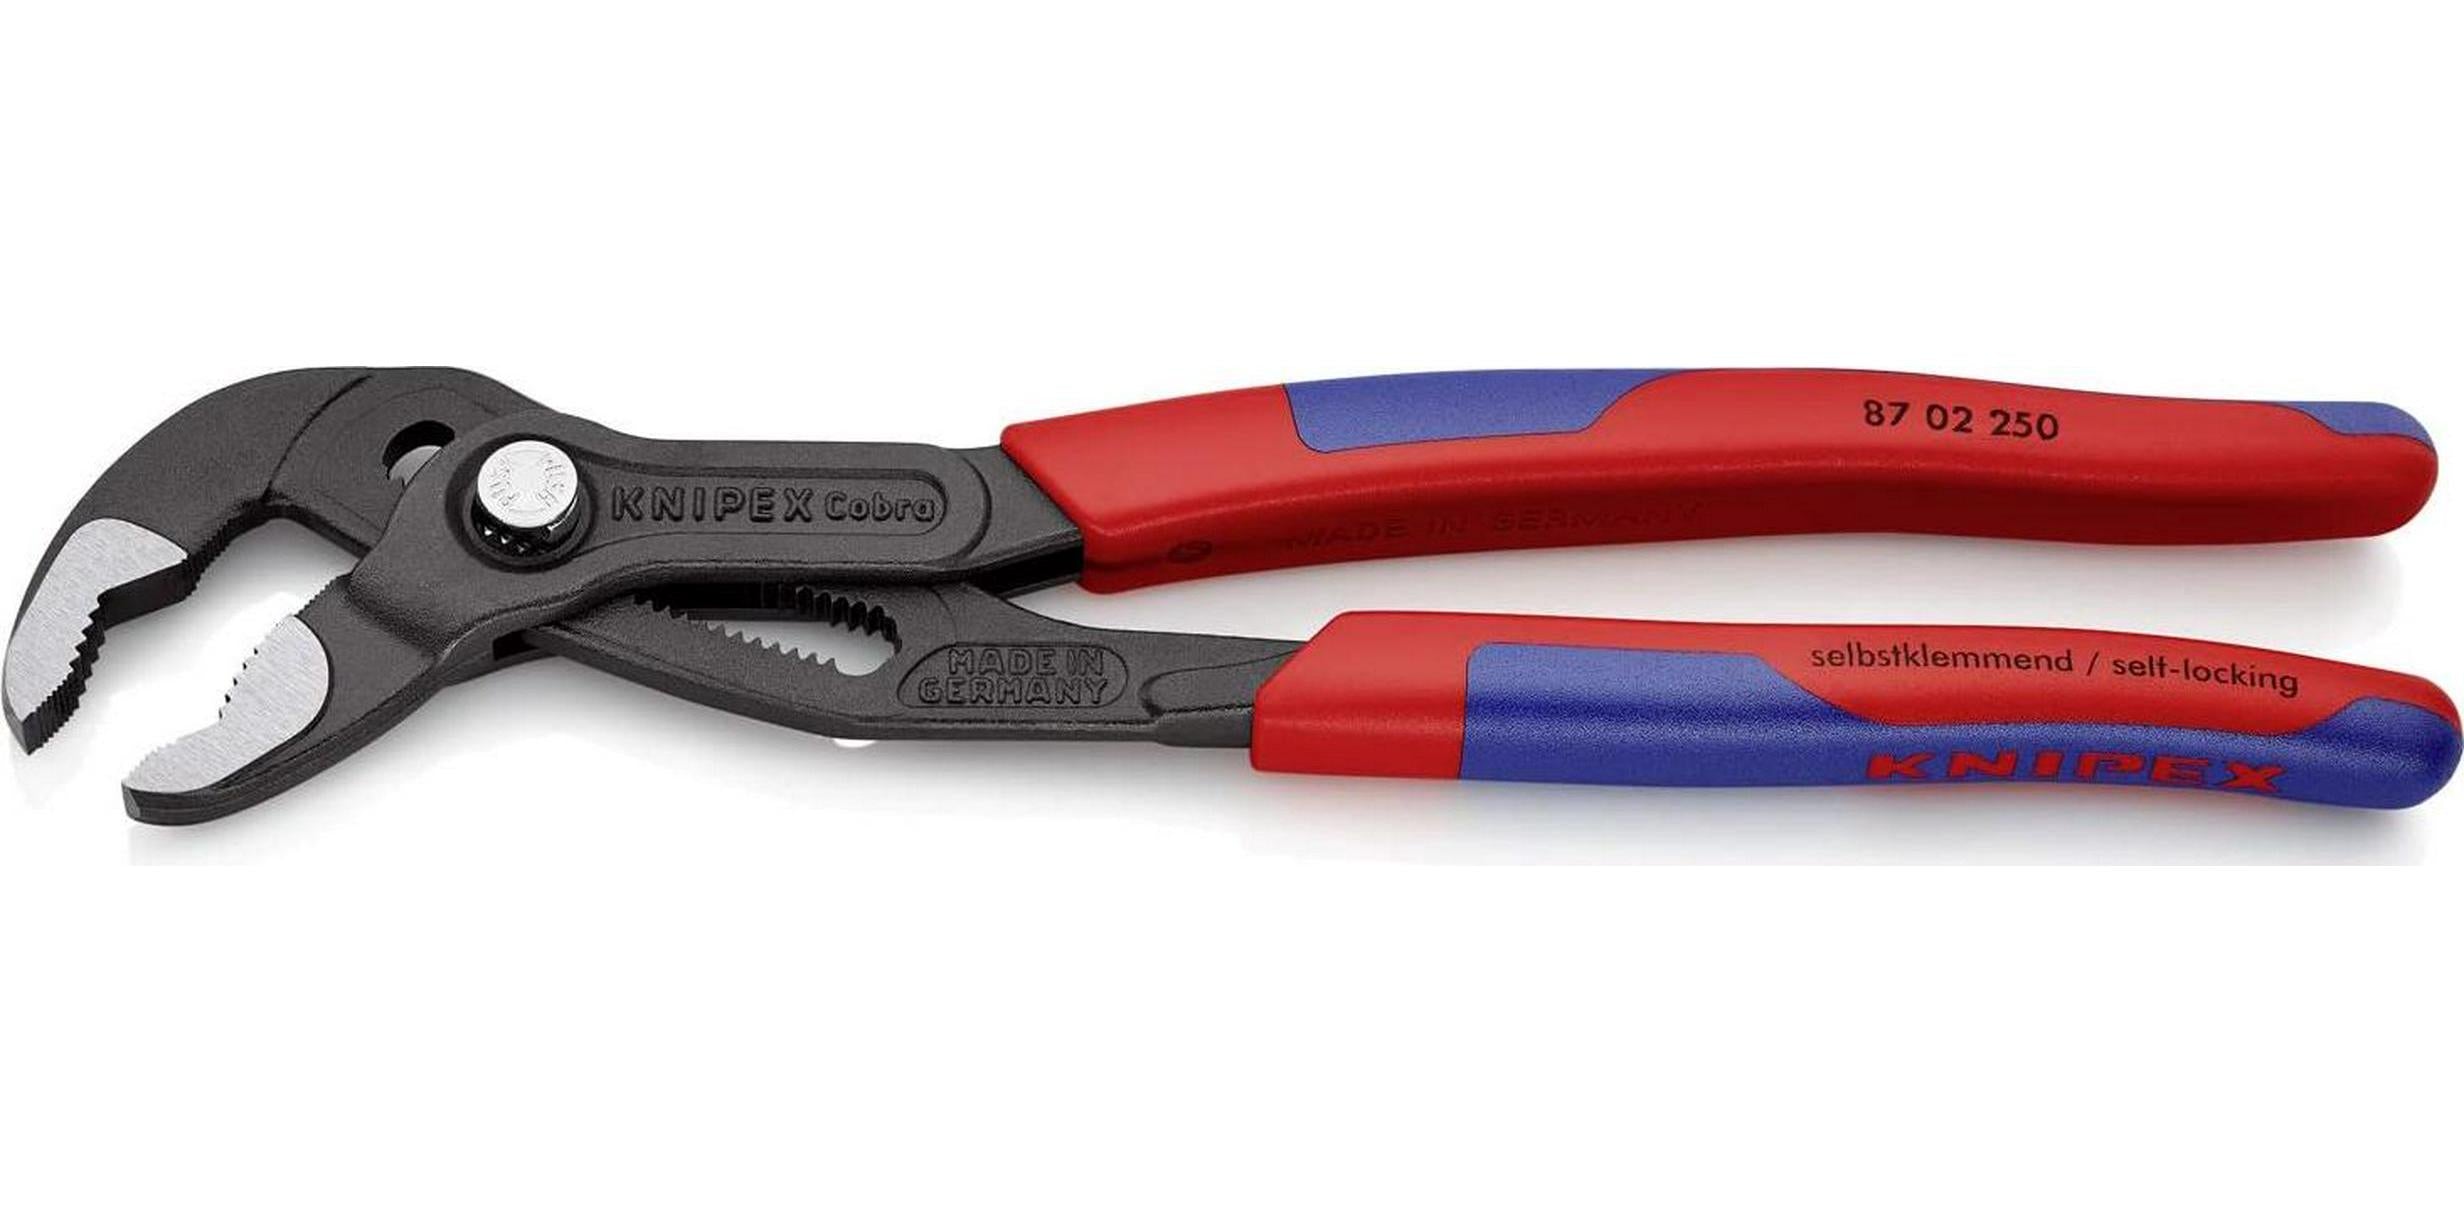 KNIPEX, Knipex 87 02 250 SB Cobra High-tech Water Pump Pliers grey atramentized with slim multi-component grips (Blister Packed), 250 mm